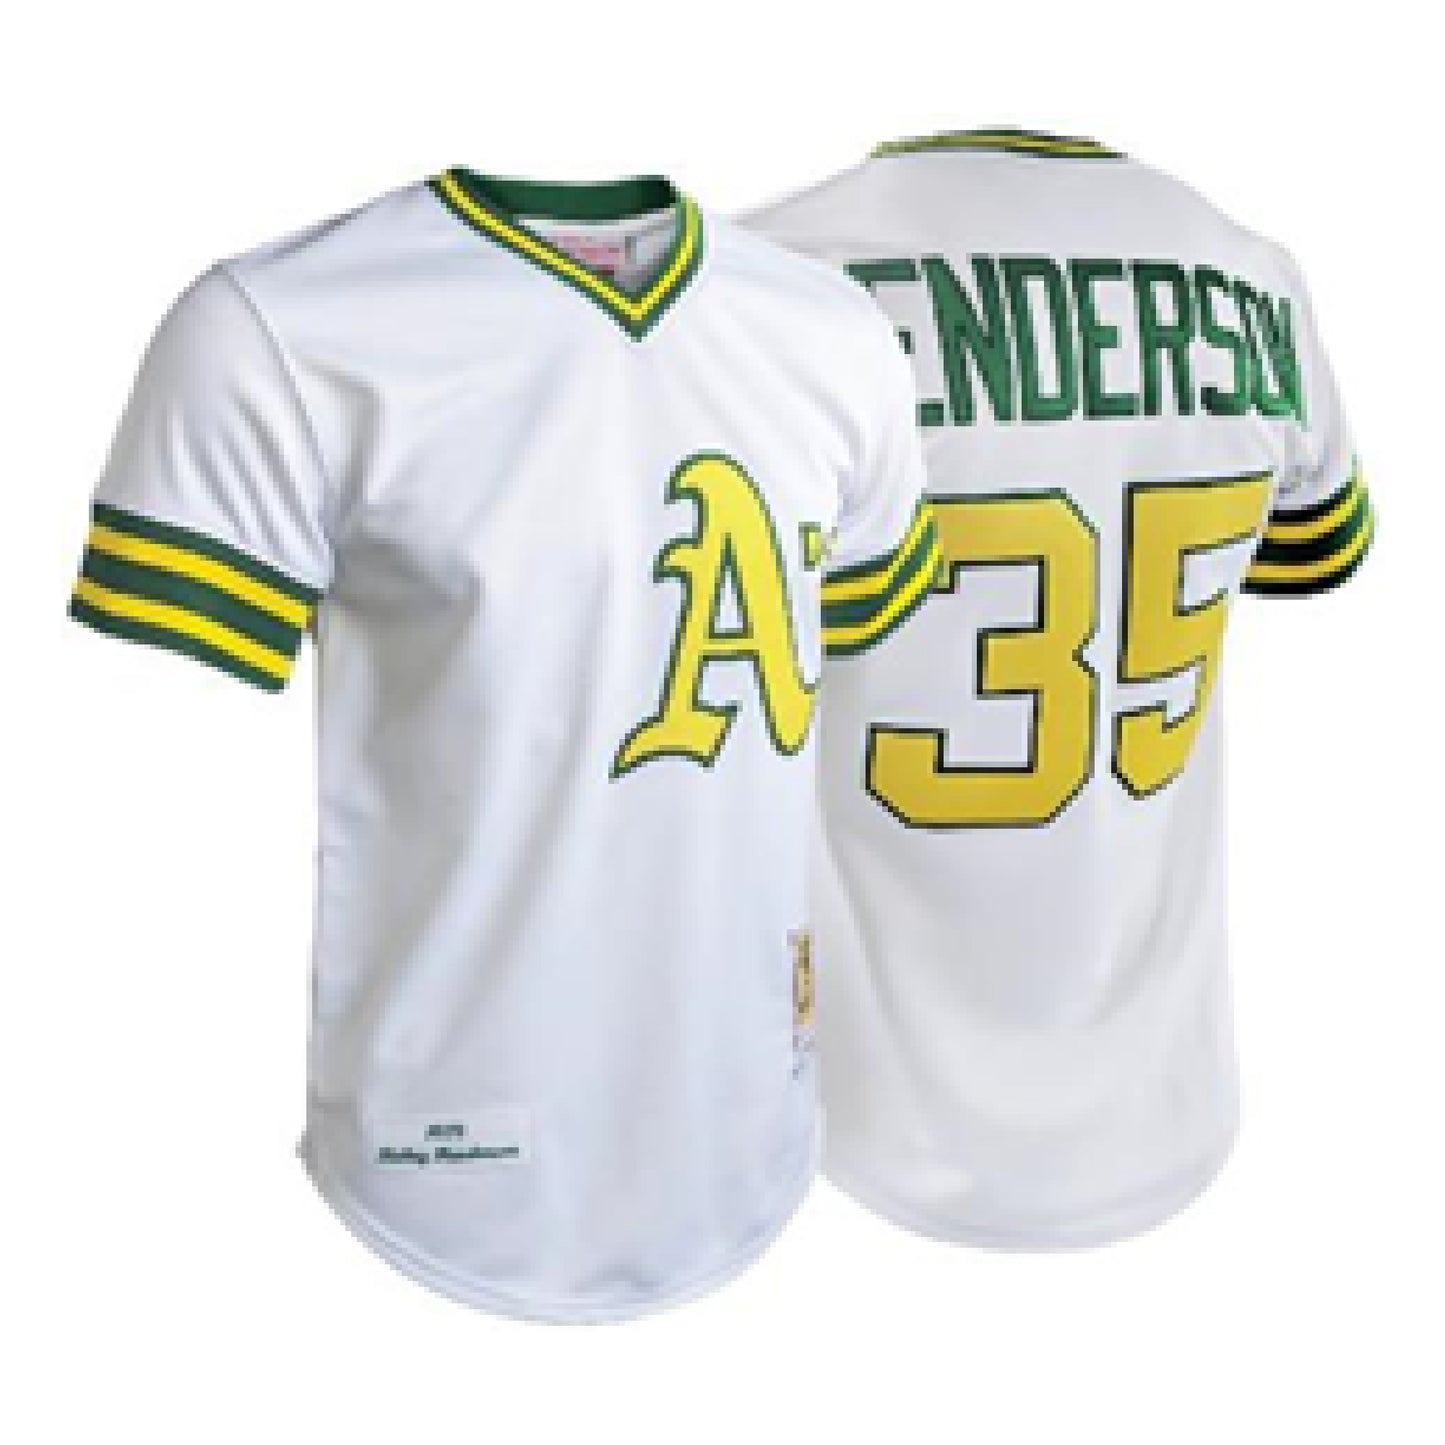 Authentic Jersey Oakland Athletics Rickey Anderson #35 - Broski Clothing